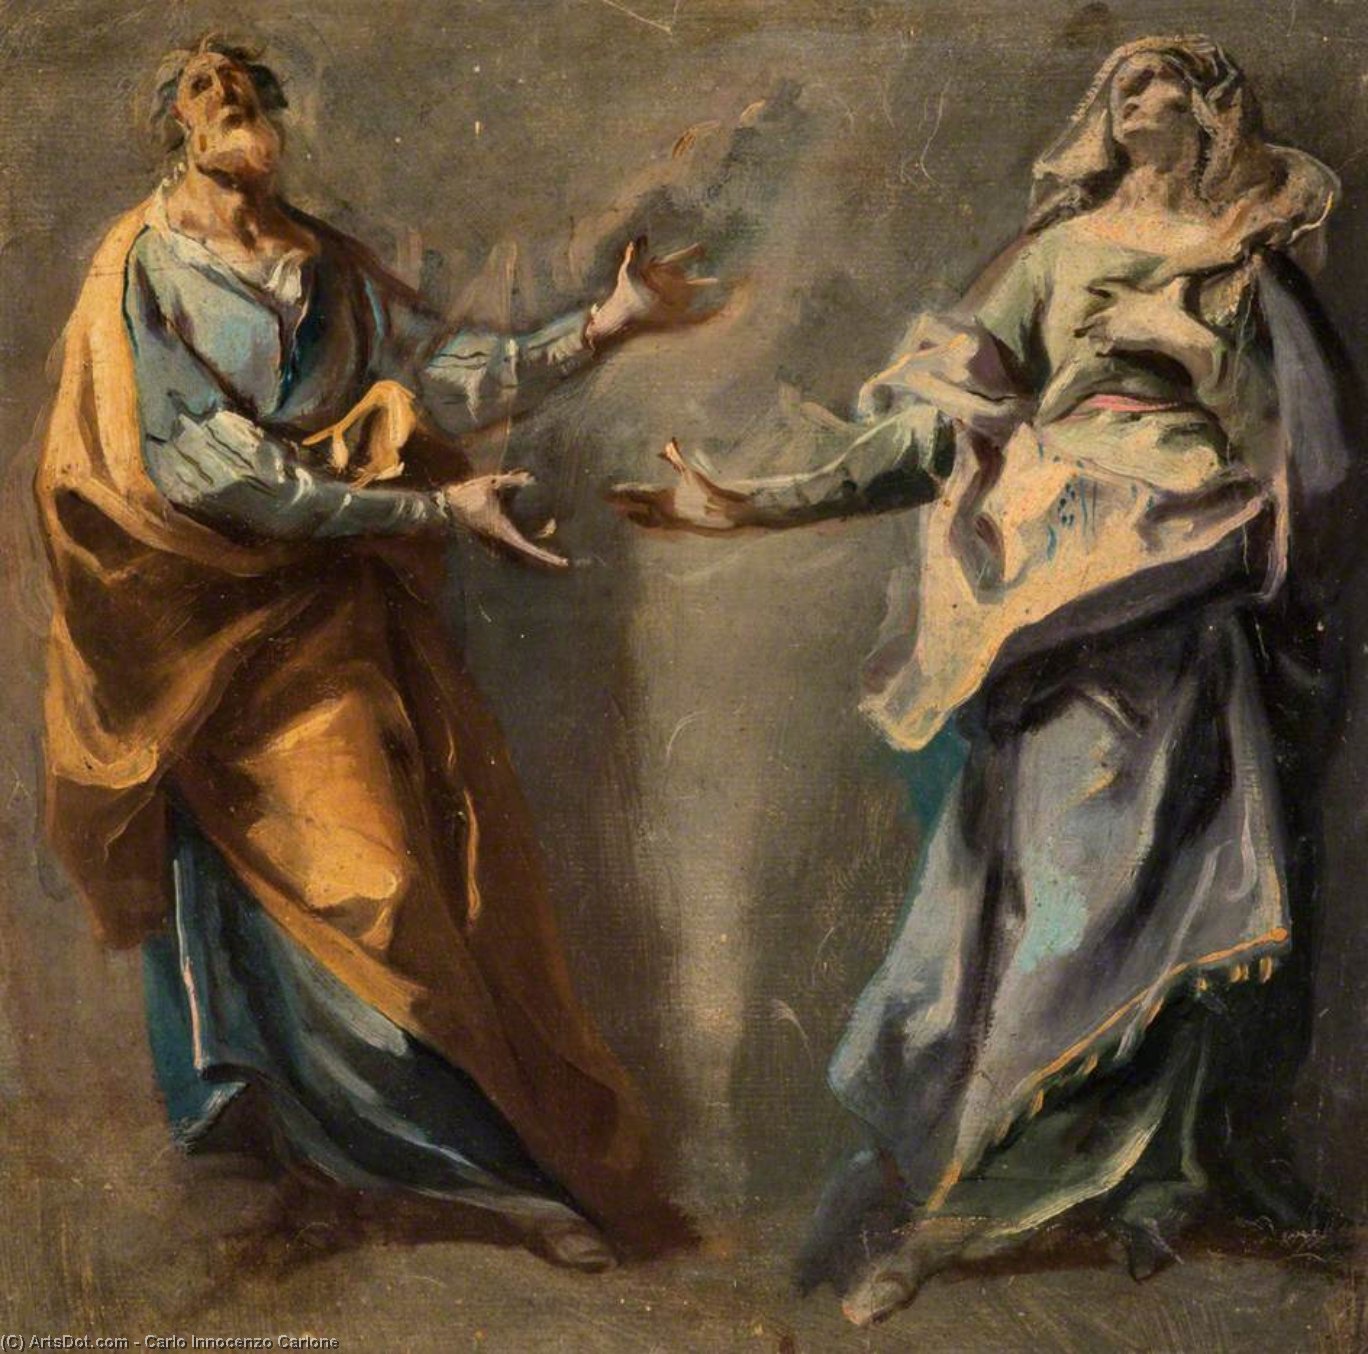 Wikioo.org - สารานุกรมวิจิตรศิลป์ - จิตรกรรม Carlo Innocenzo Carlone - Study of Two Figures in Adoration (possibly Saint Joseph and the Virgin Mary, or Saints Joachim and Anna)